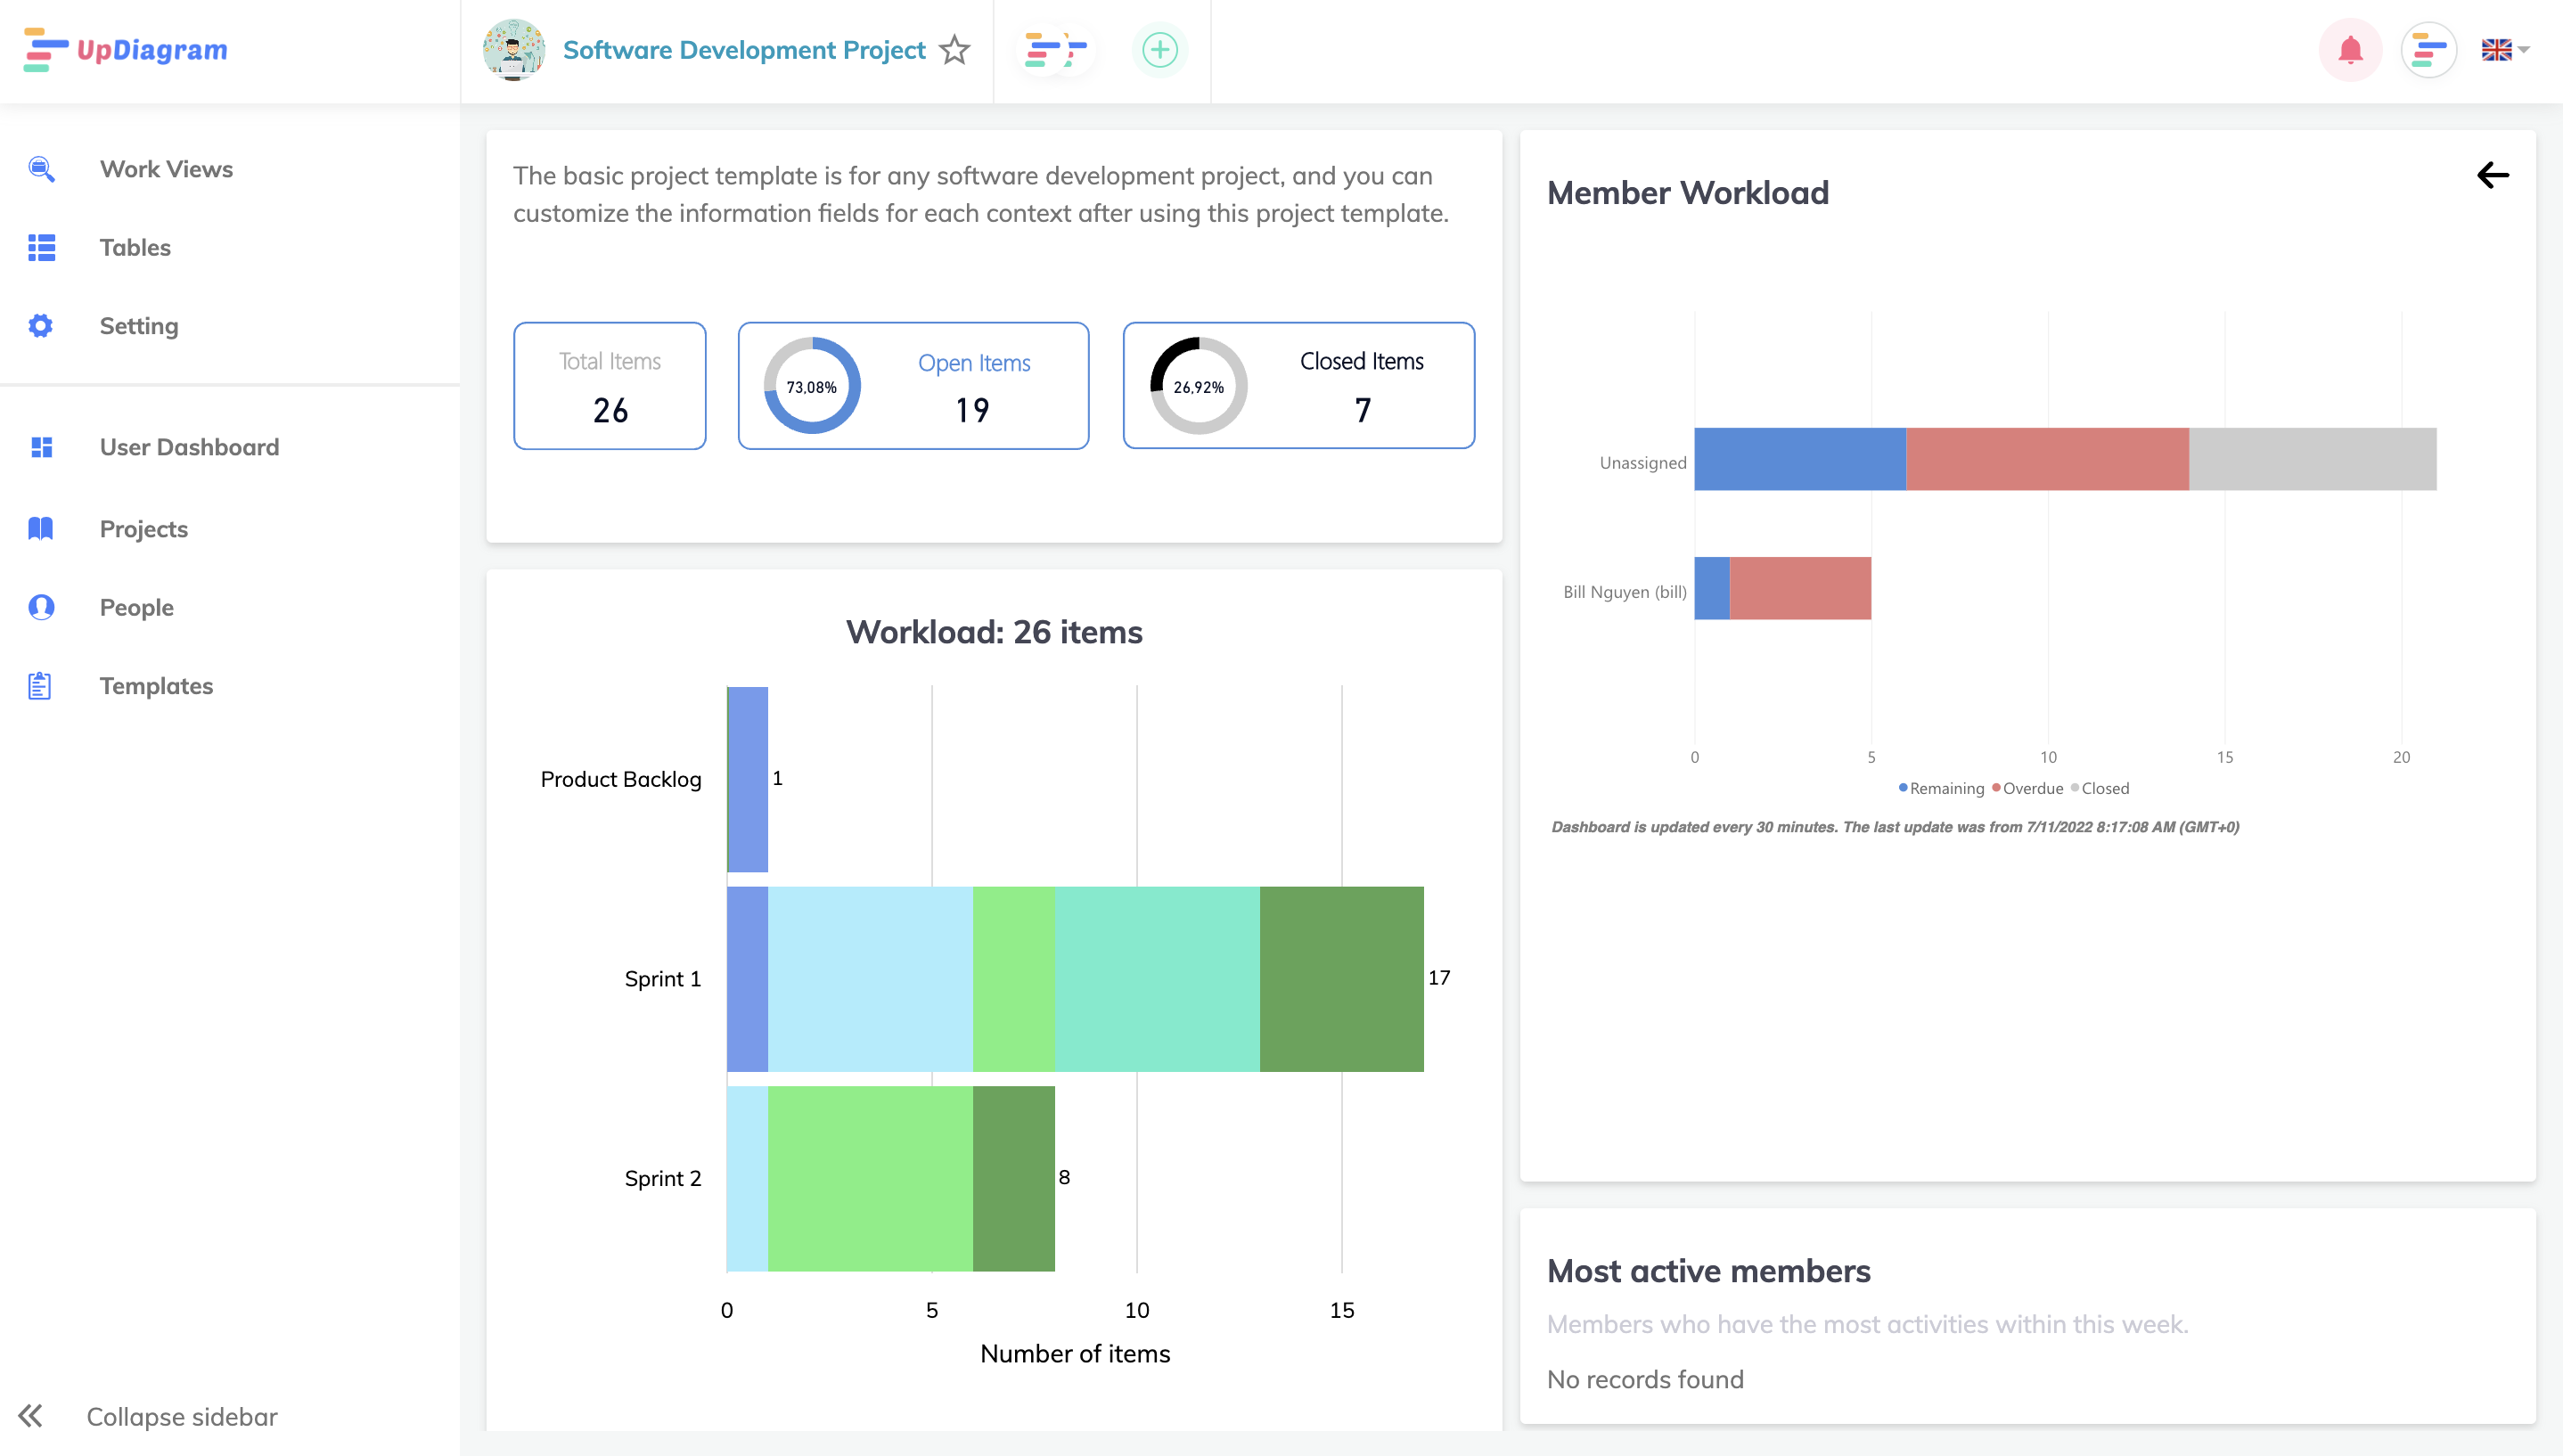 projects dashboard